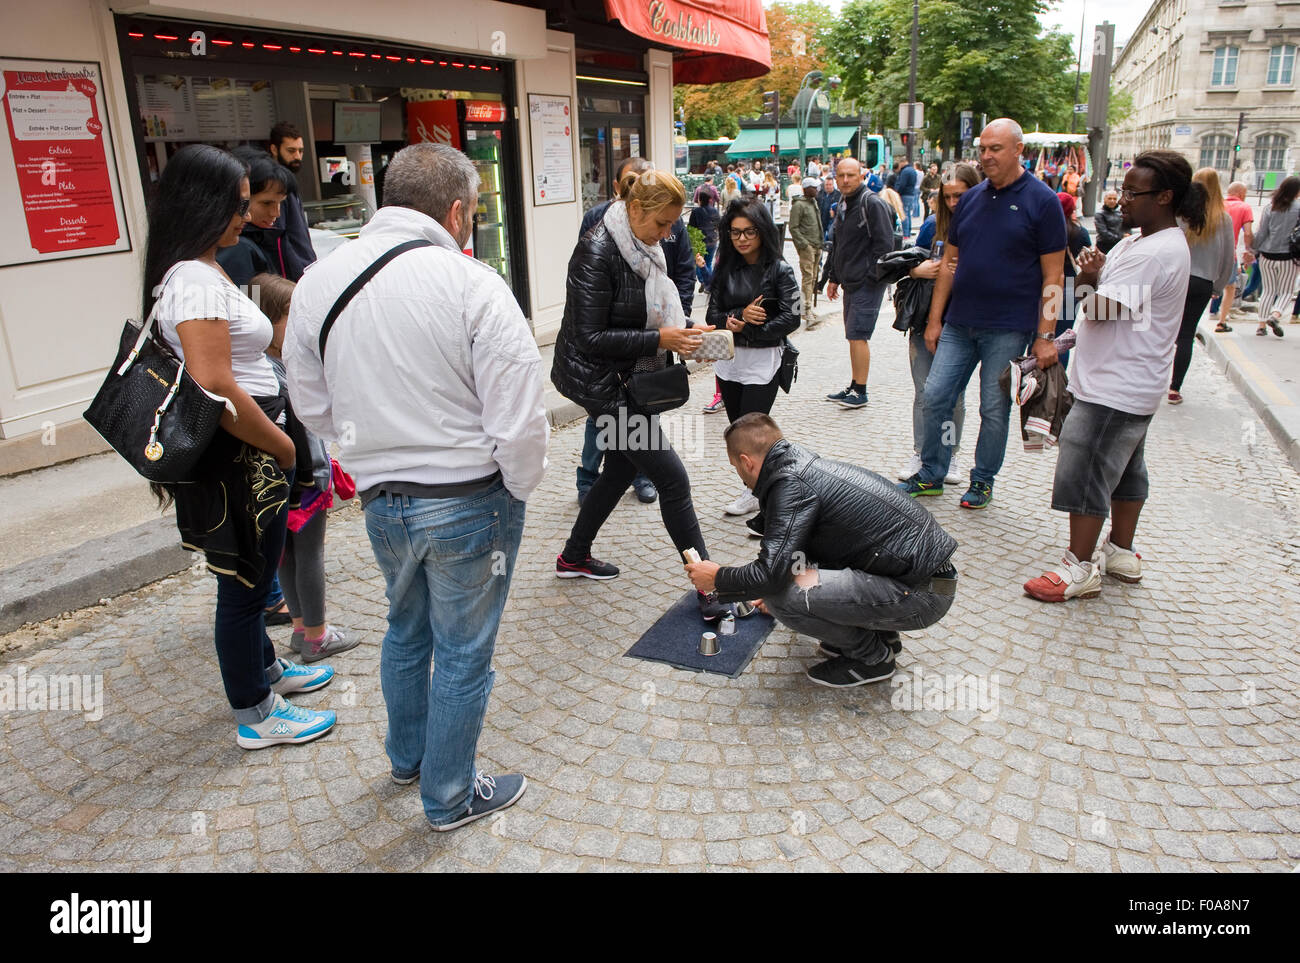 PARIS, FRANCE - JULY 28, 2015: A man is playing a conjuring trick game what is illegal on a street in Paris in france Stock Photo